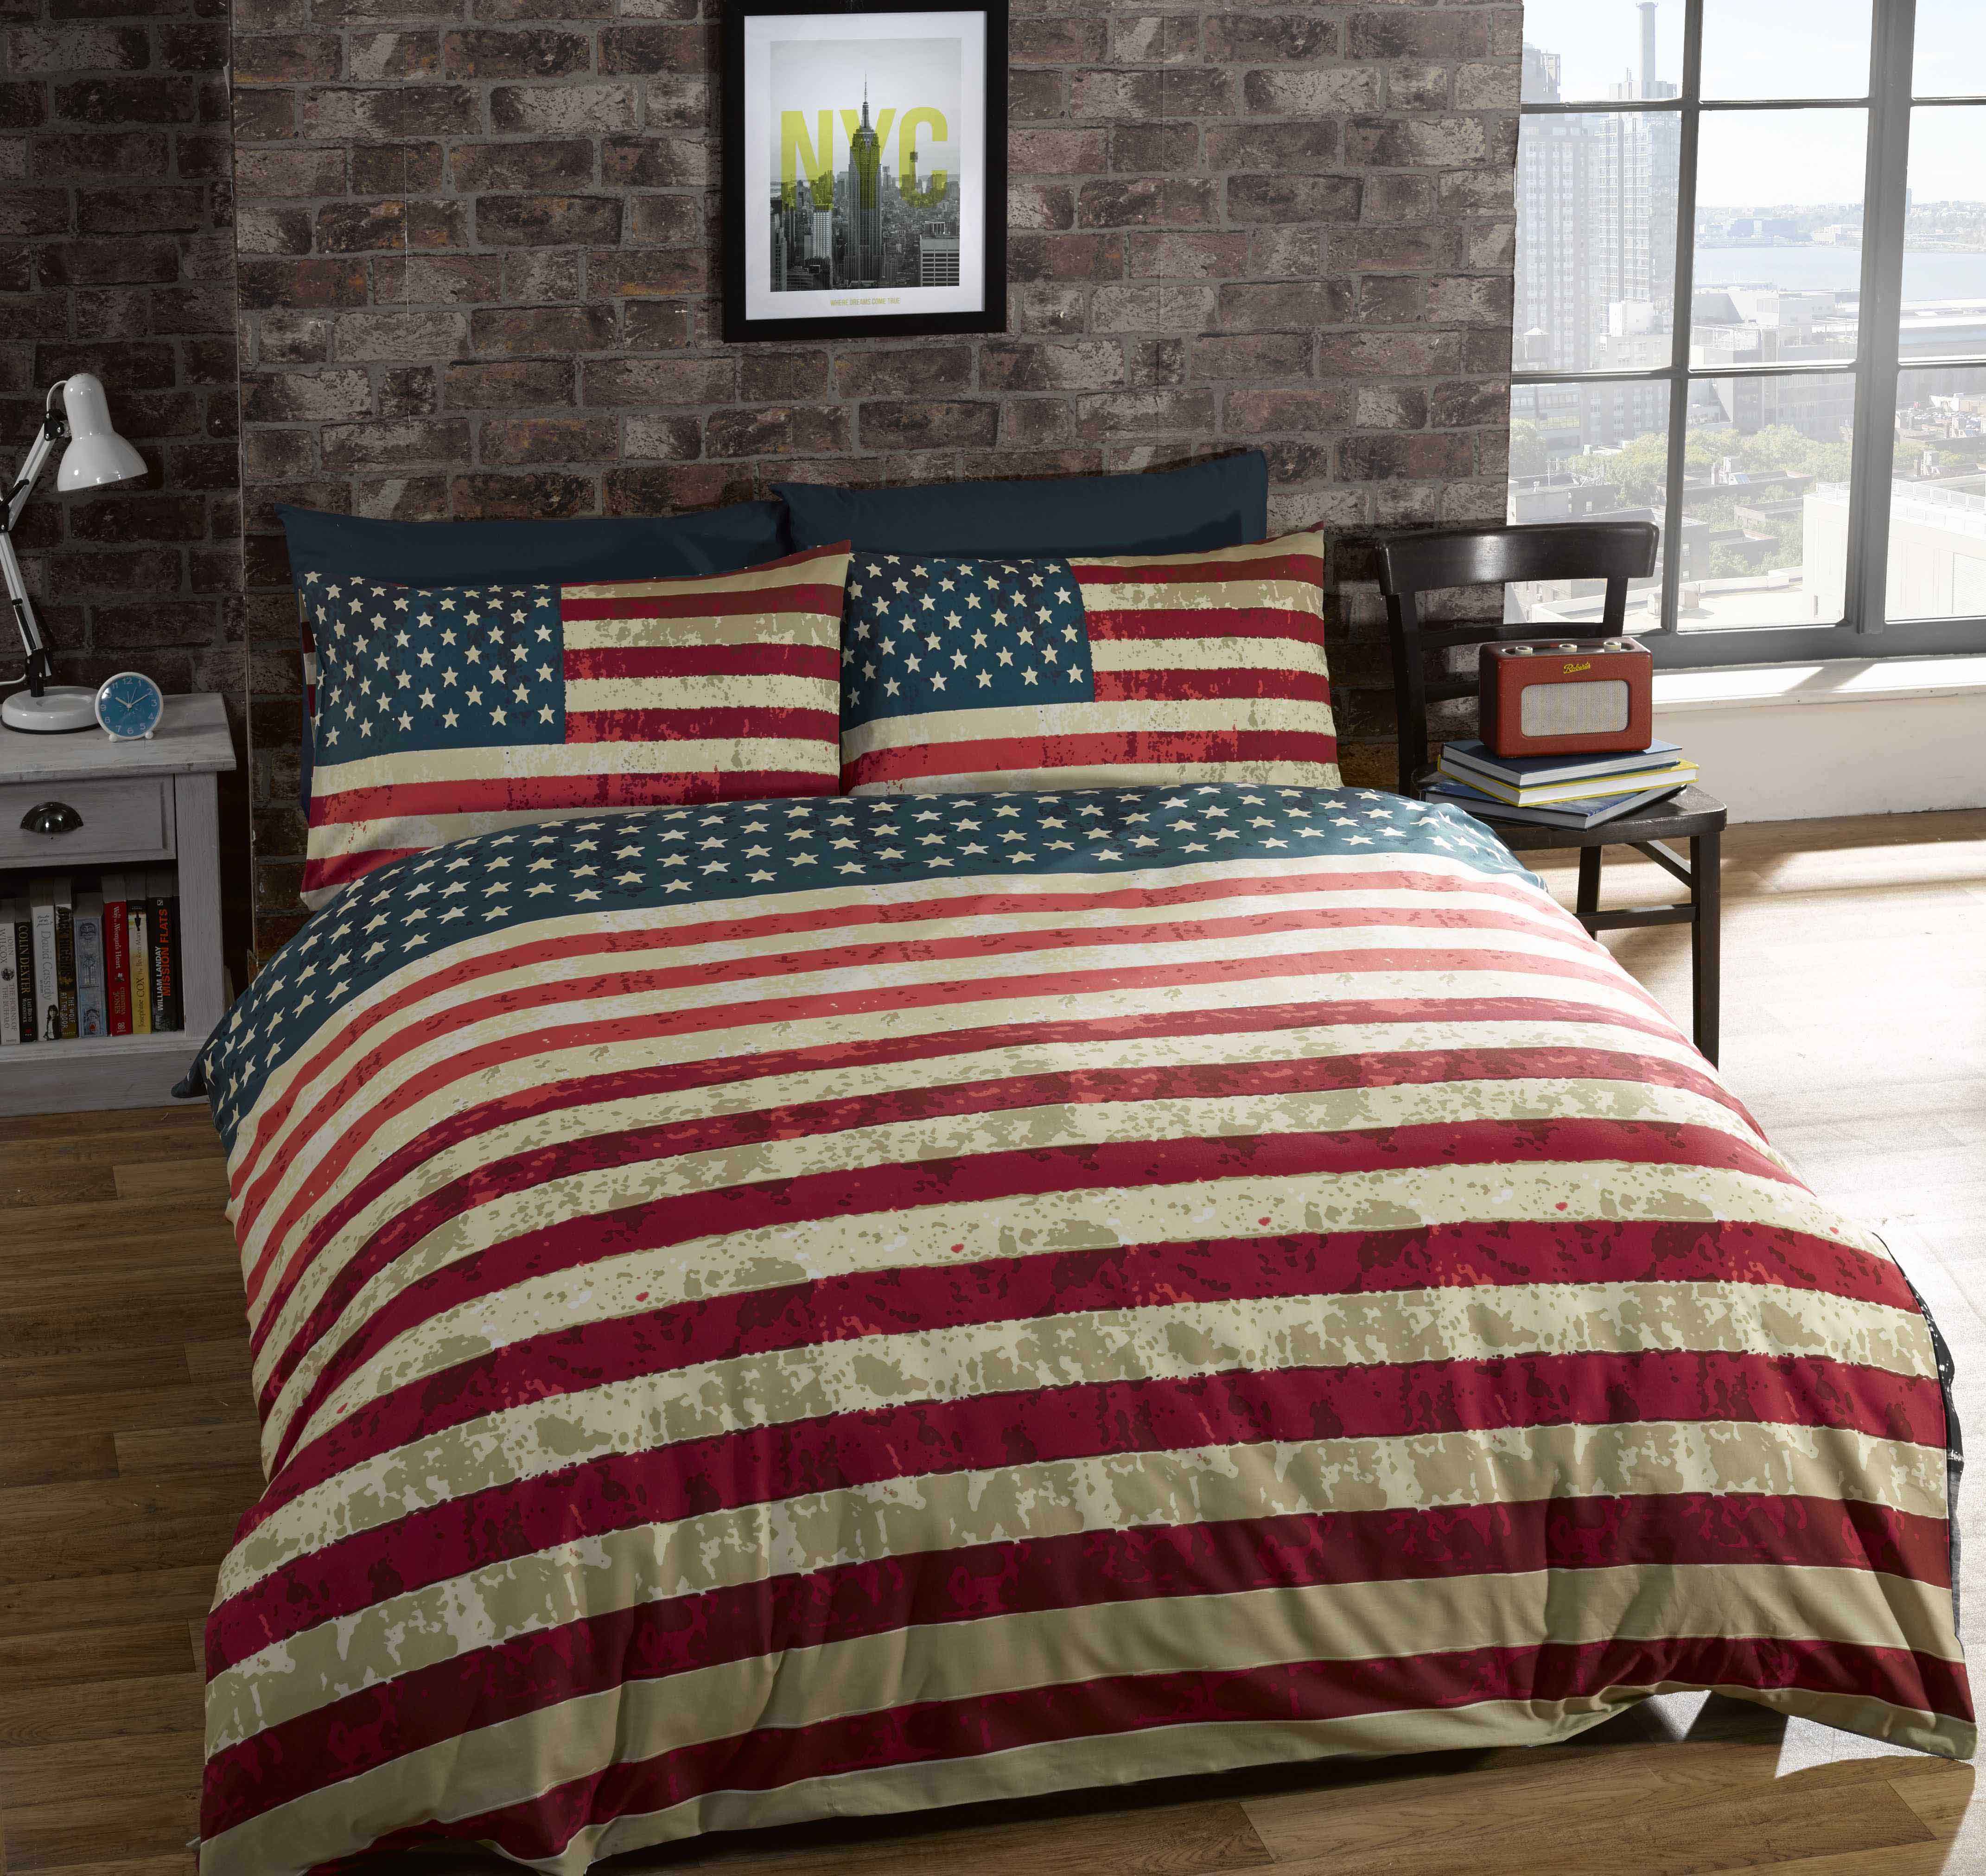 All around the World and Flags Duvet Sets